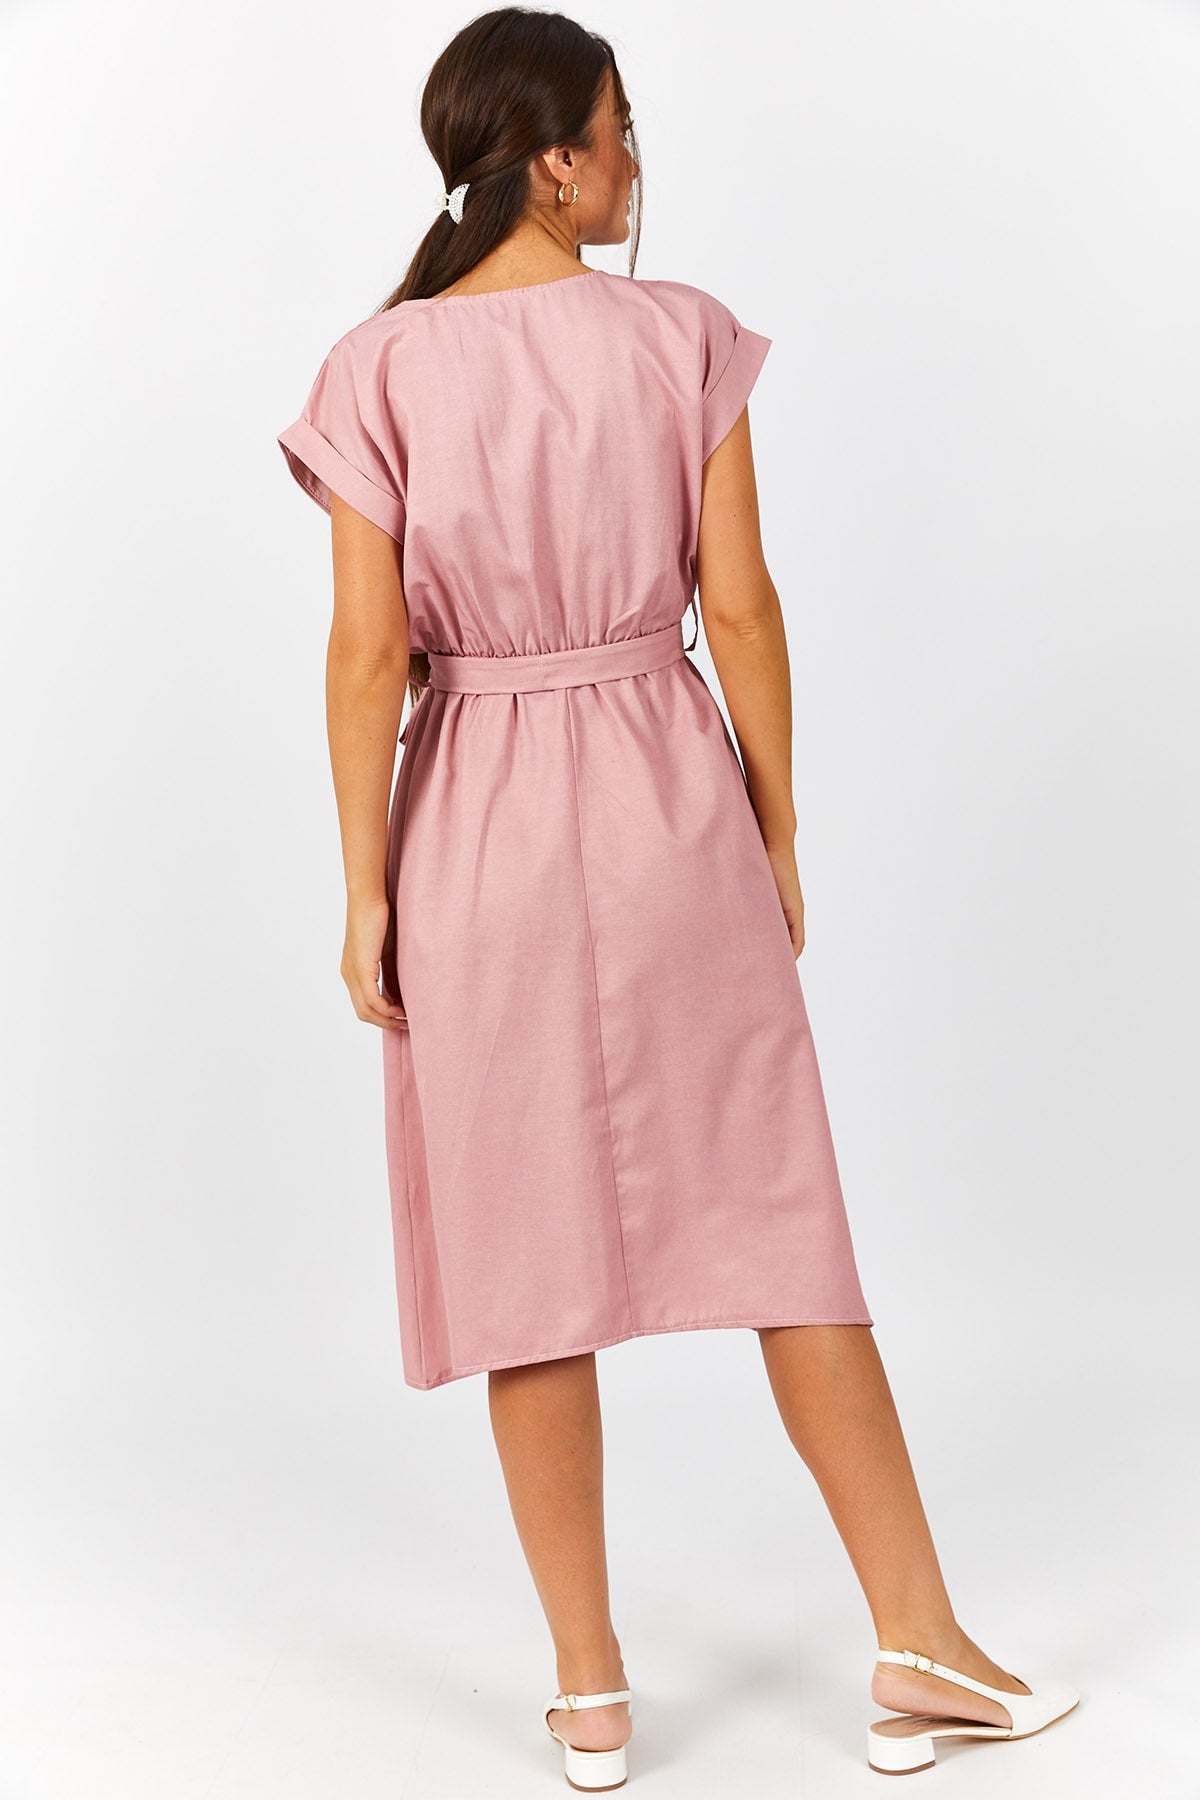 WOMEN'S ROSE DRY WALL WALL TIPTED DRESS ARM-221139